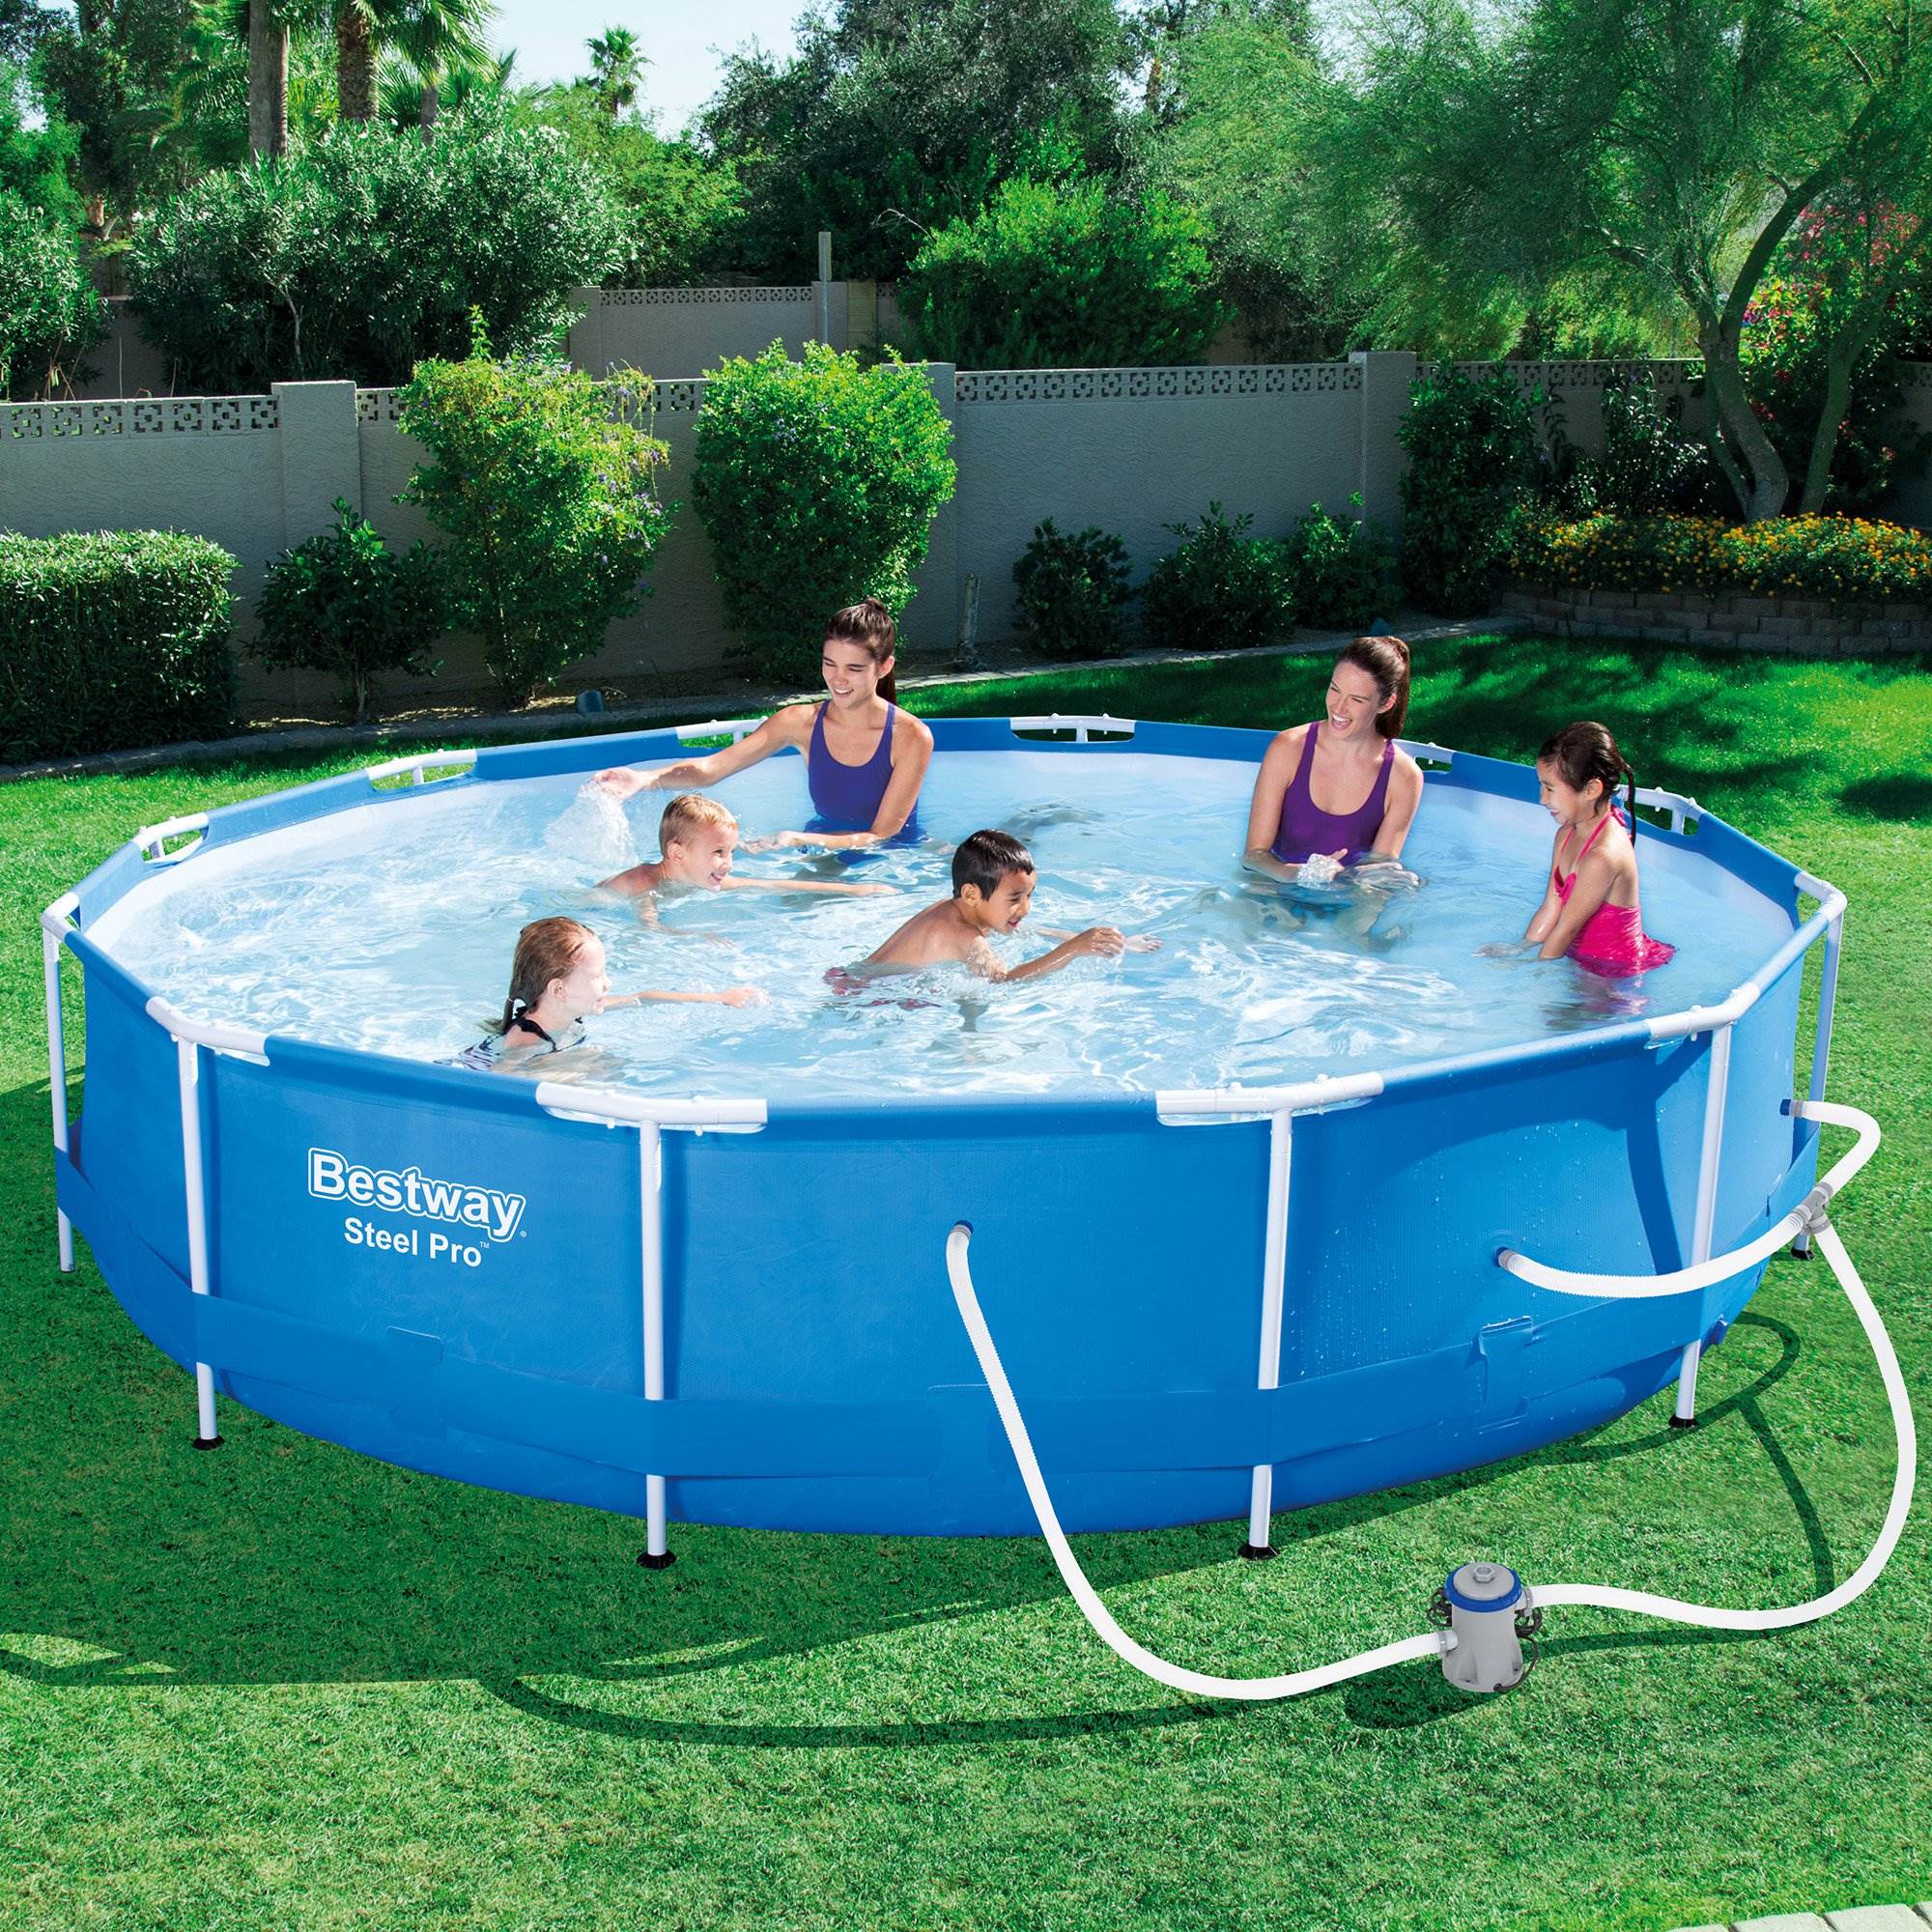 Bestway Steel Pro 12ft x 30in Frame Above Ground Pool Set with Pump and ...